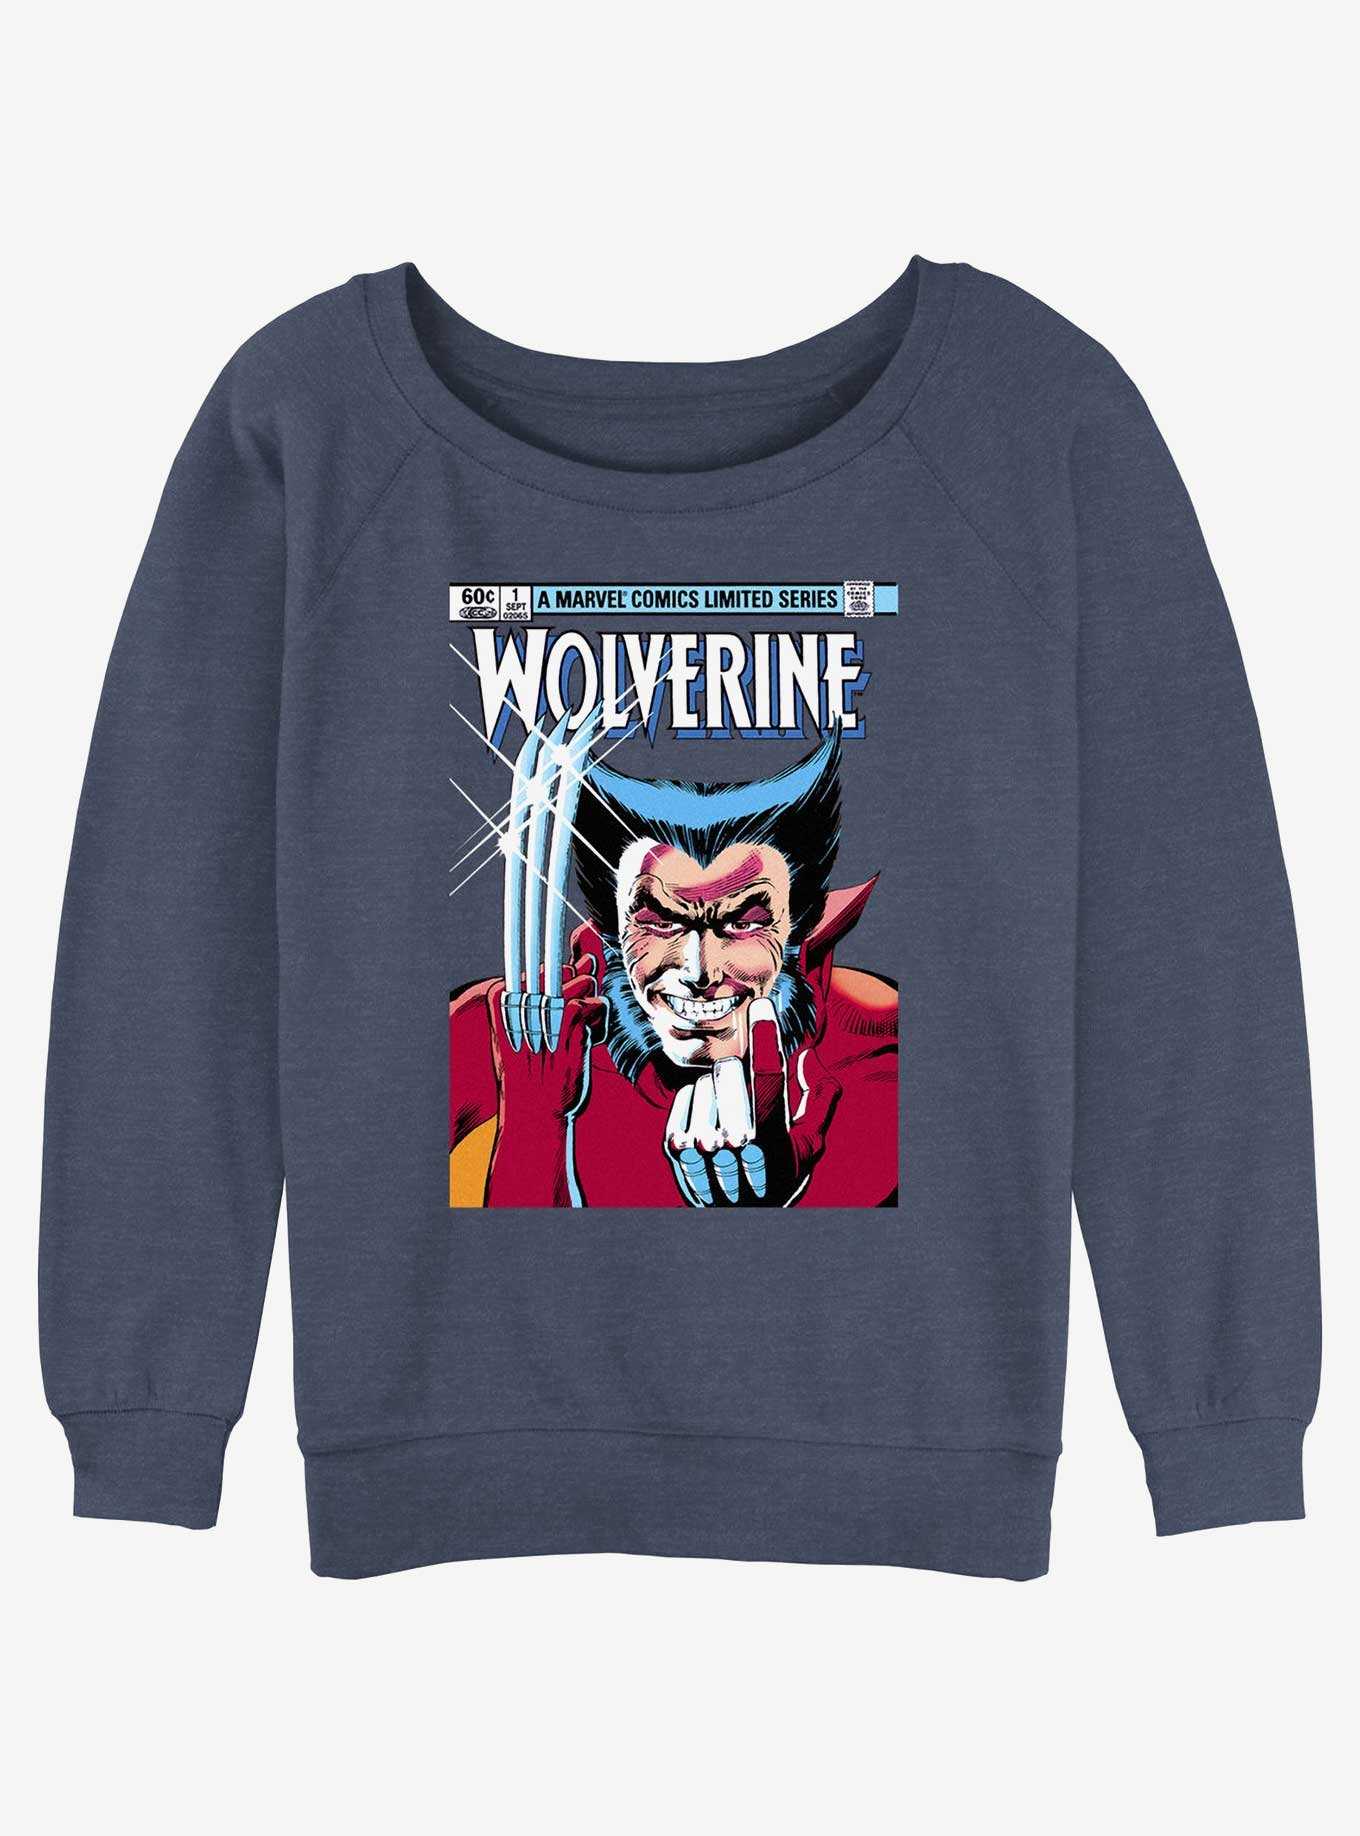 Wolverine 1st Issue Comic Cover Womens Slouchy Sweatshirt, , hi-res